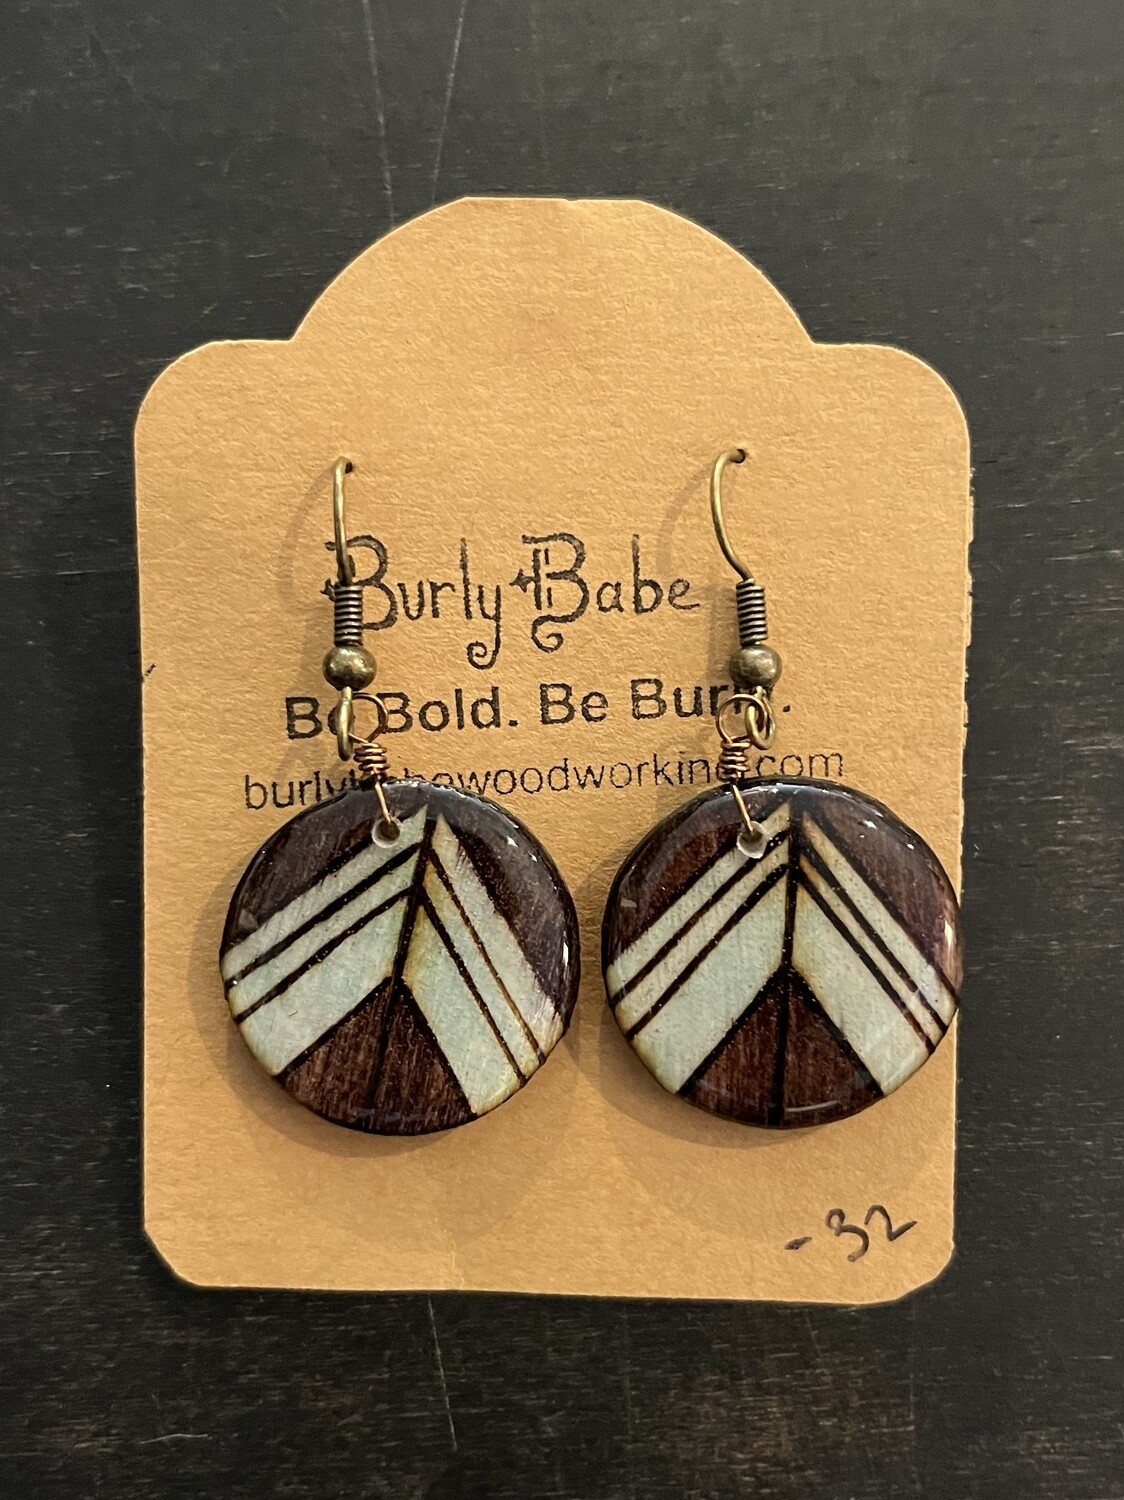 Wood burned Earrings with hand painted tent design